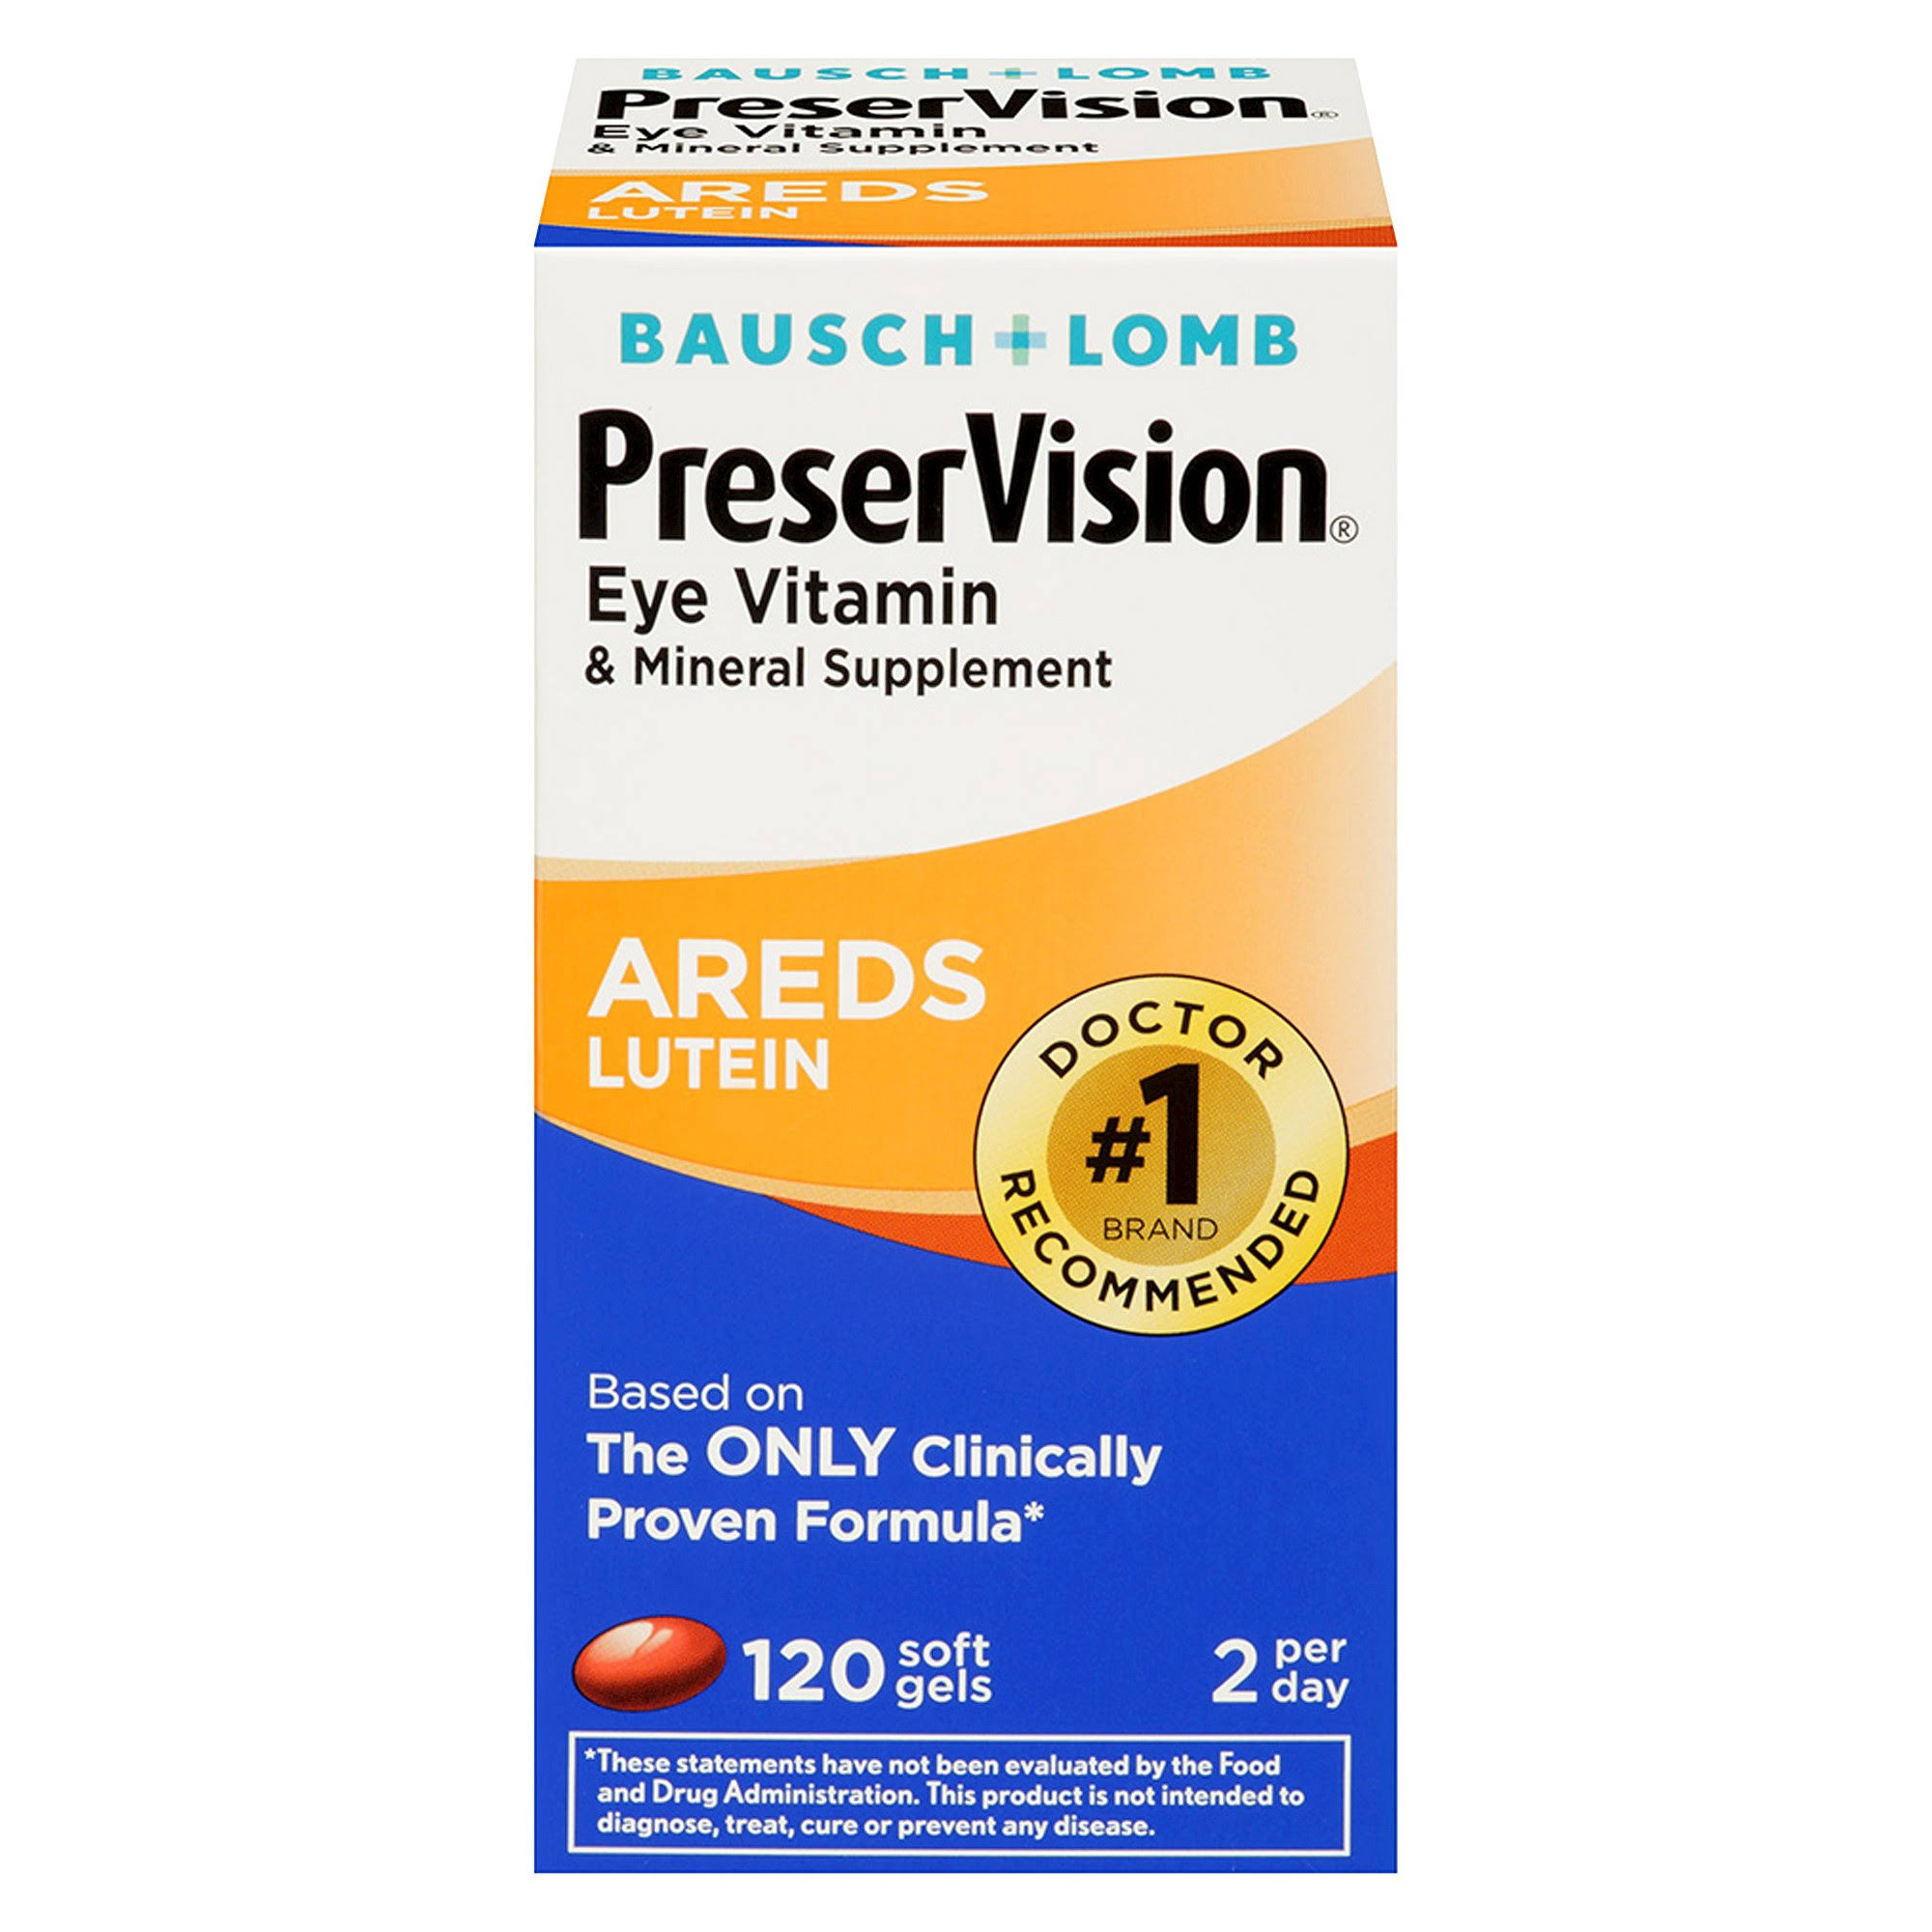 Bausch + Lomb Preservision Areds Lutein - 120 Softgels